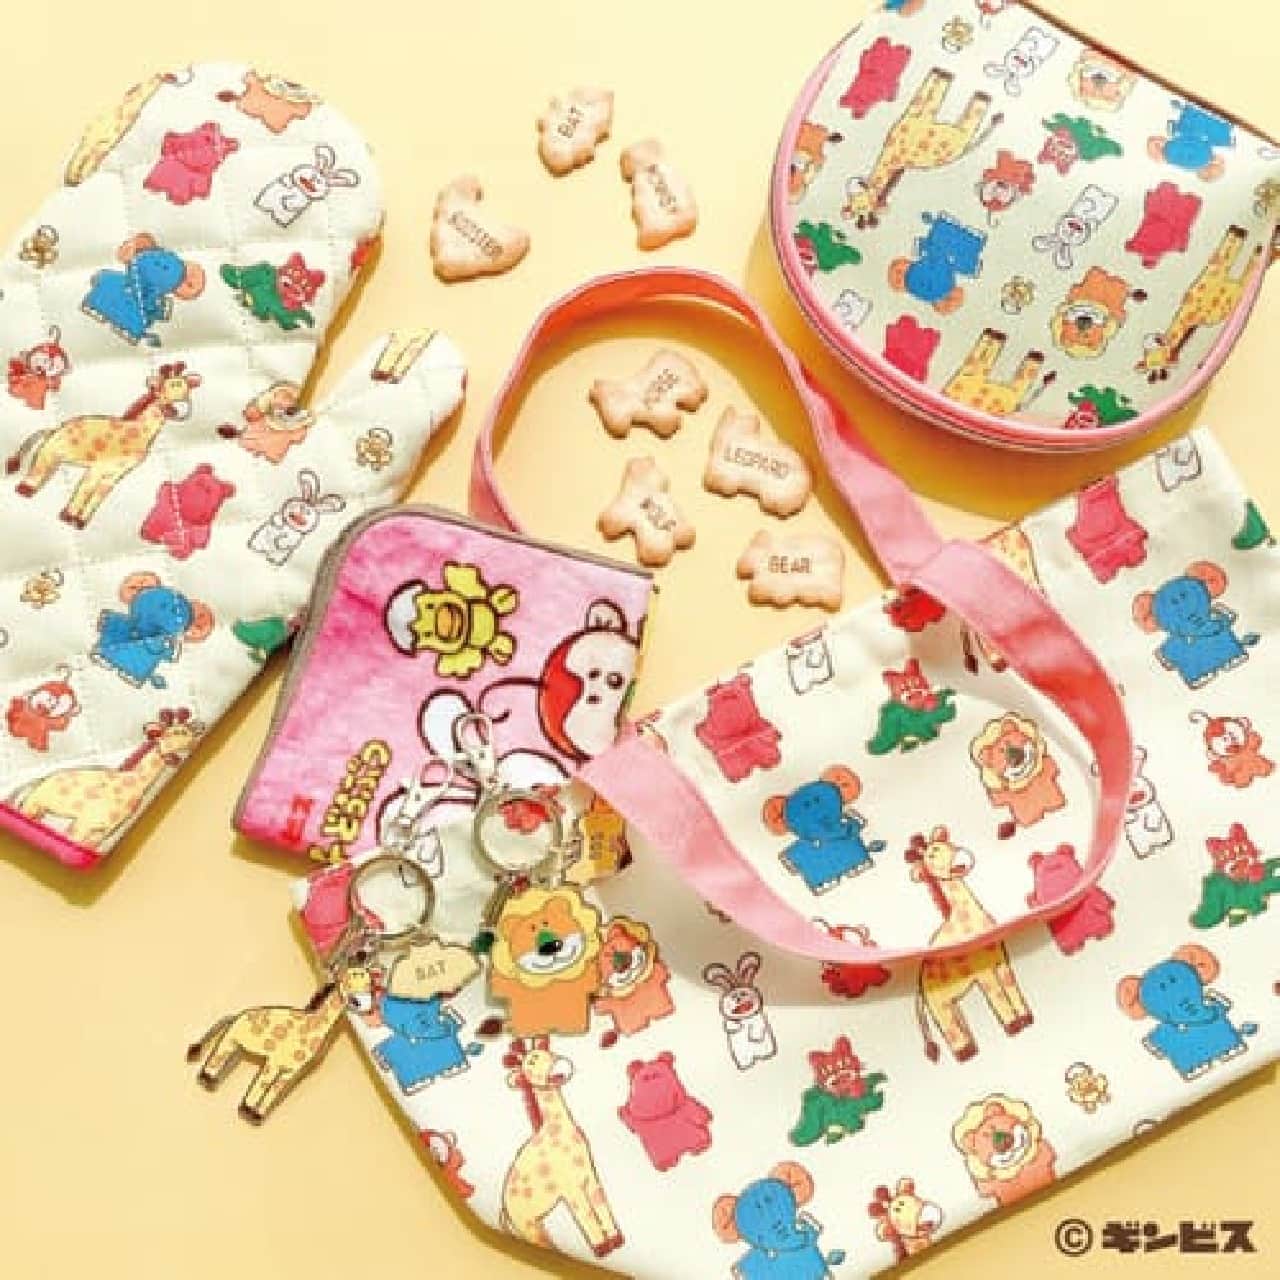 ITS’DEMO x Tabekko Animal Collaboration! Cute biscuit pattern pouch, towel, tote bag, etc.